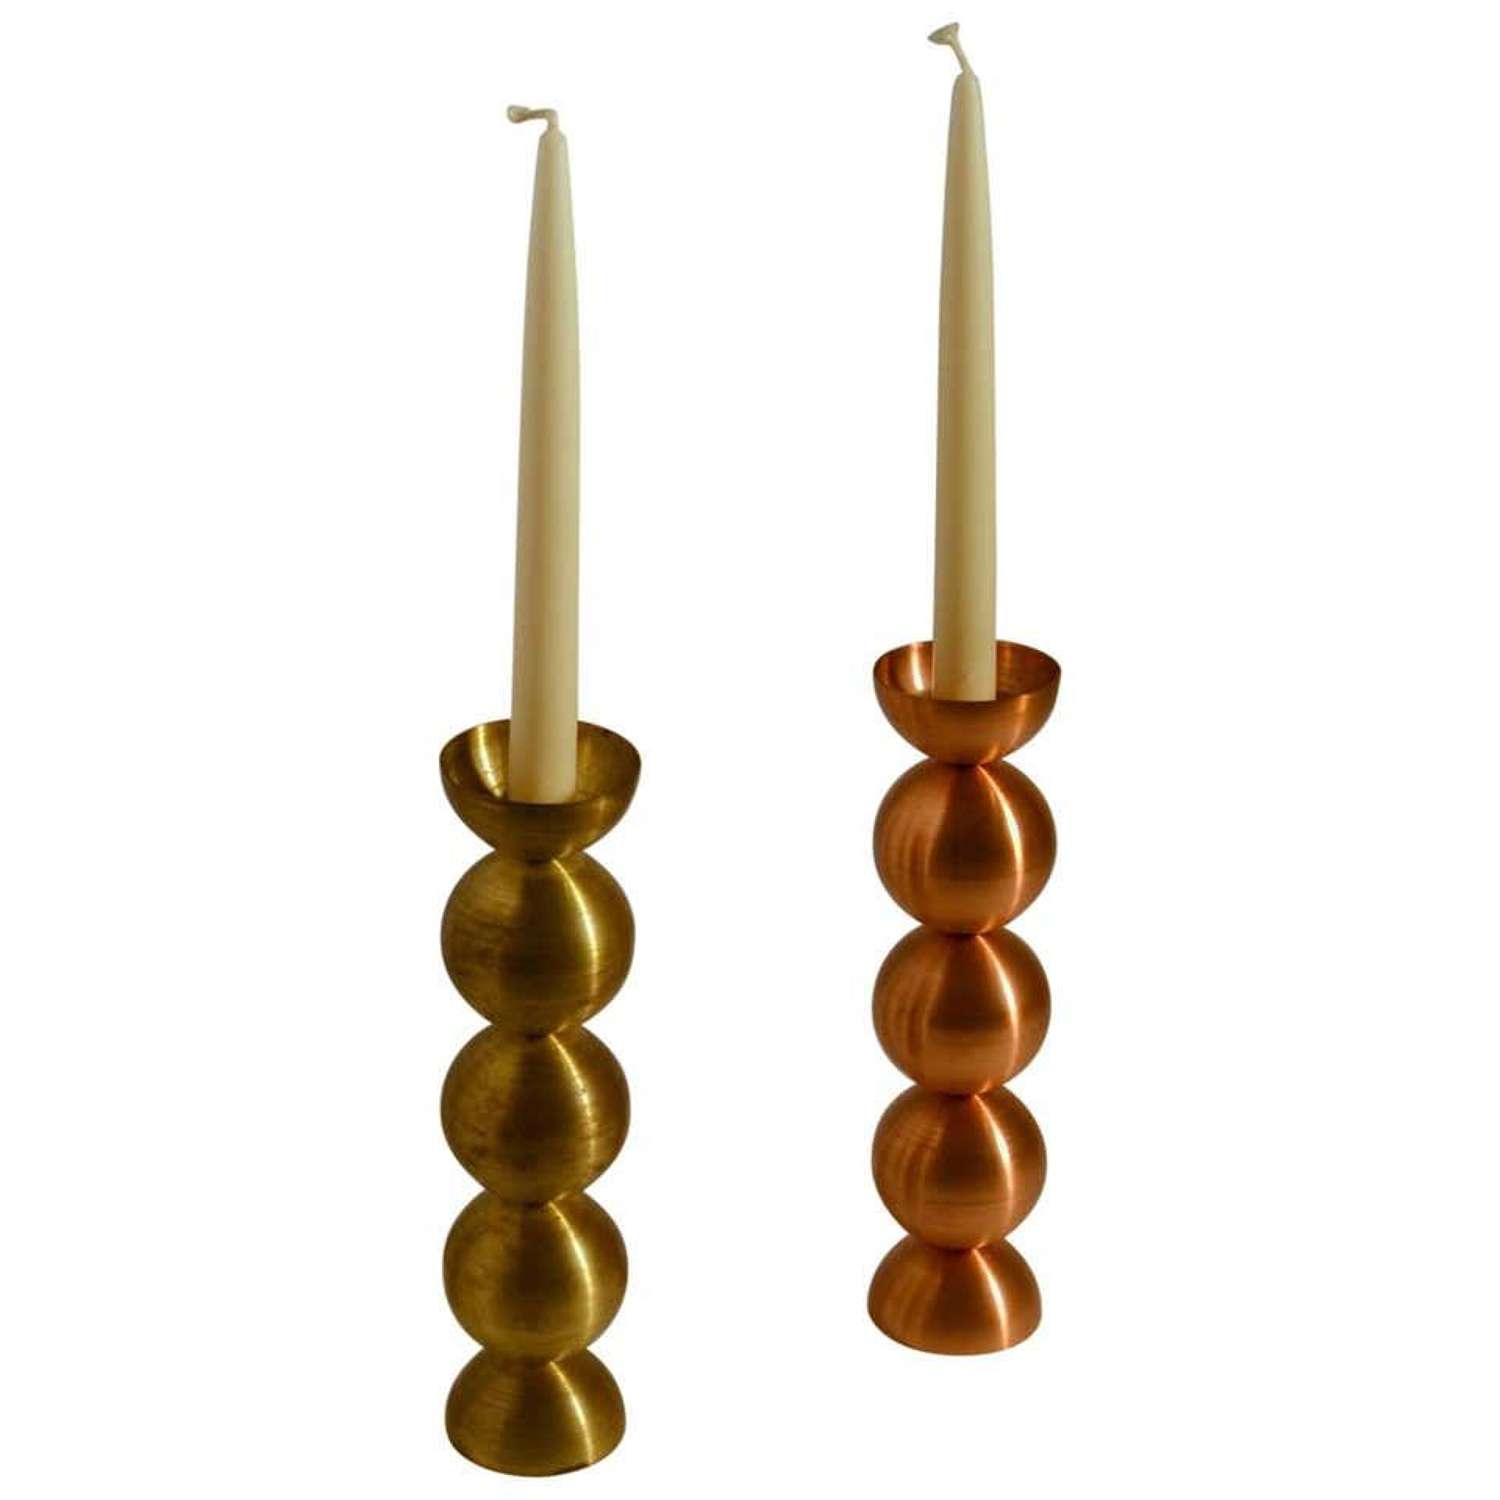 Pair of Candle holders in Brass and Copper, Sweden